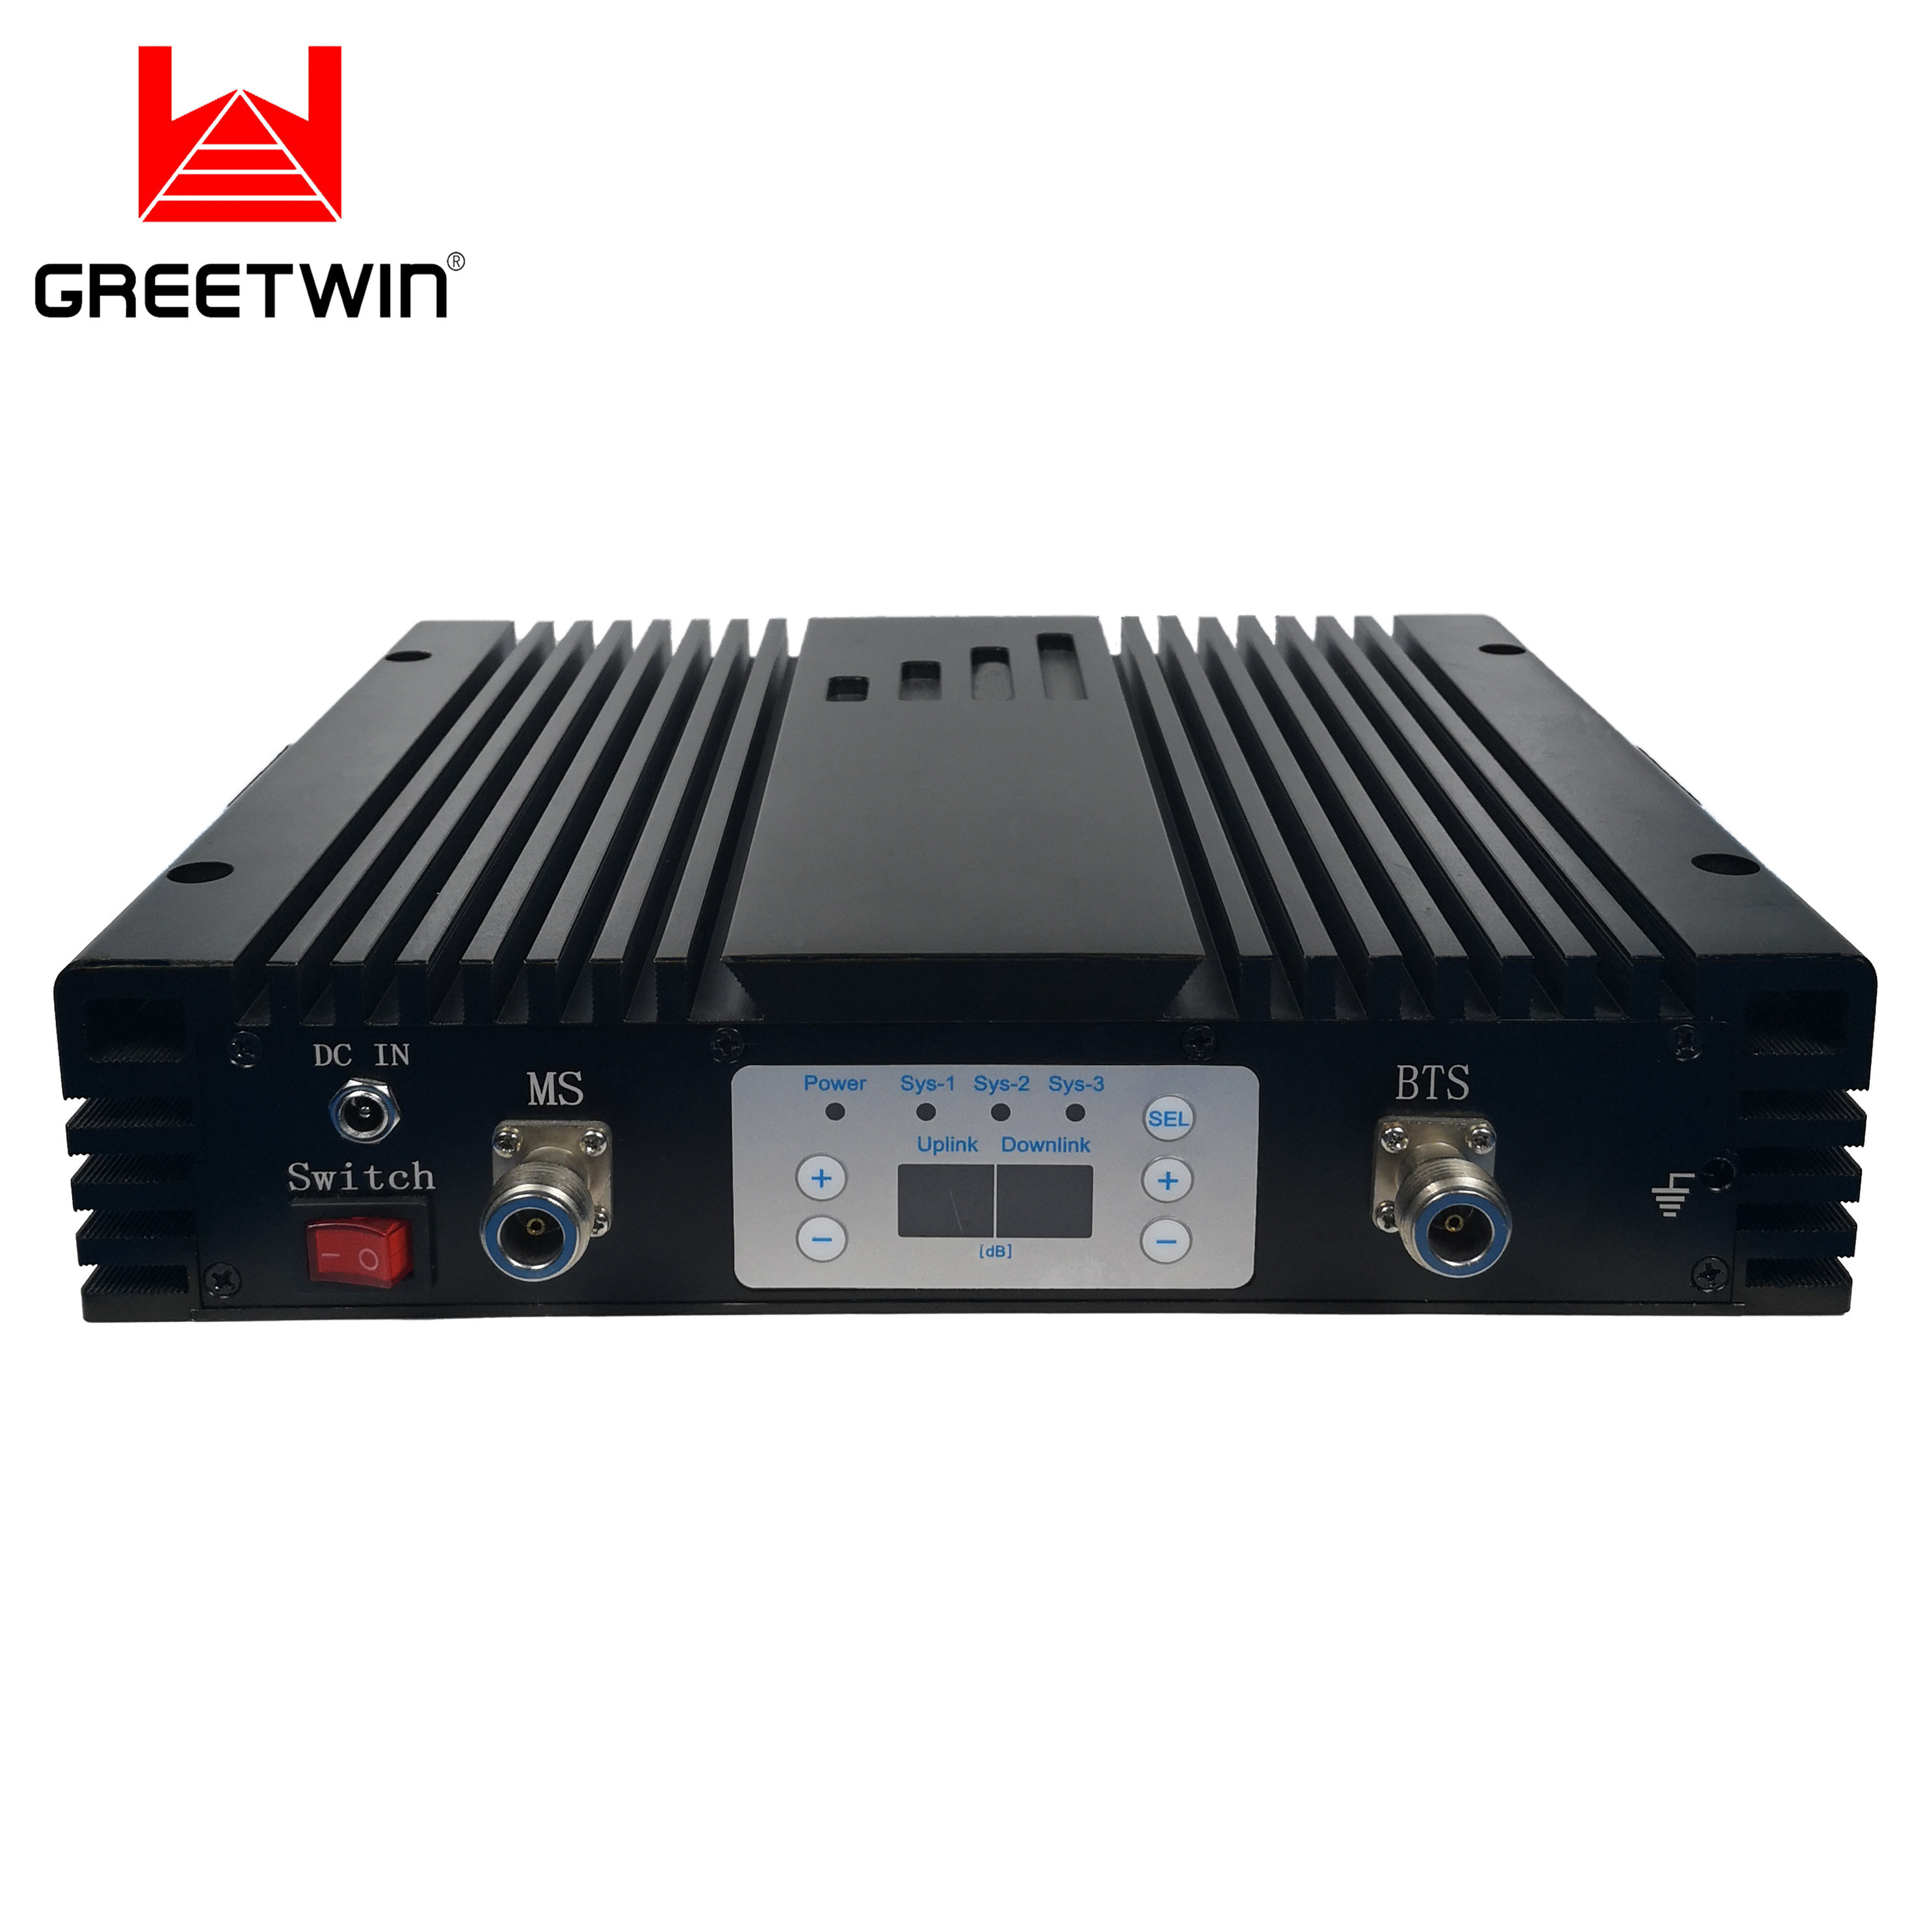 LTE800 EGSM900 70db 3G 4G Signal Network Booster